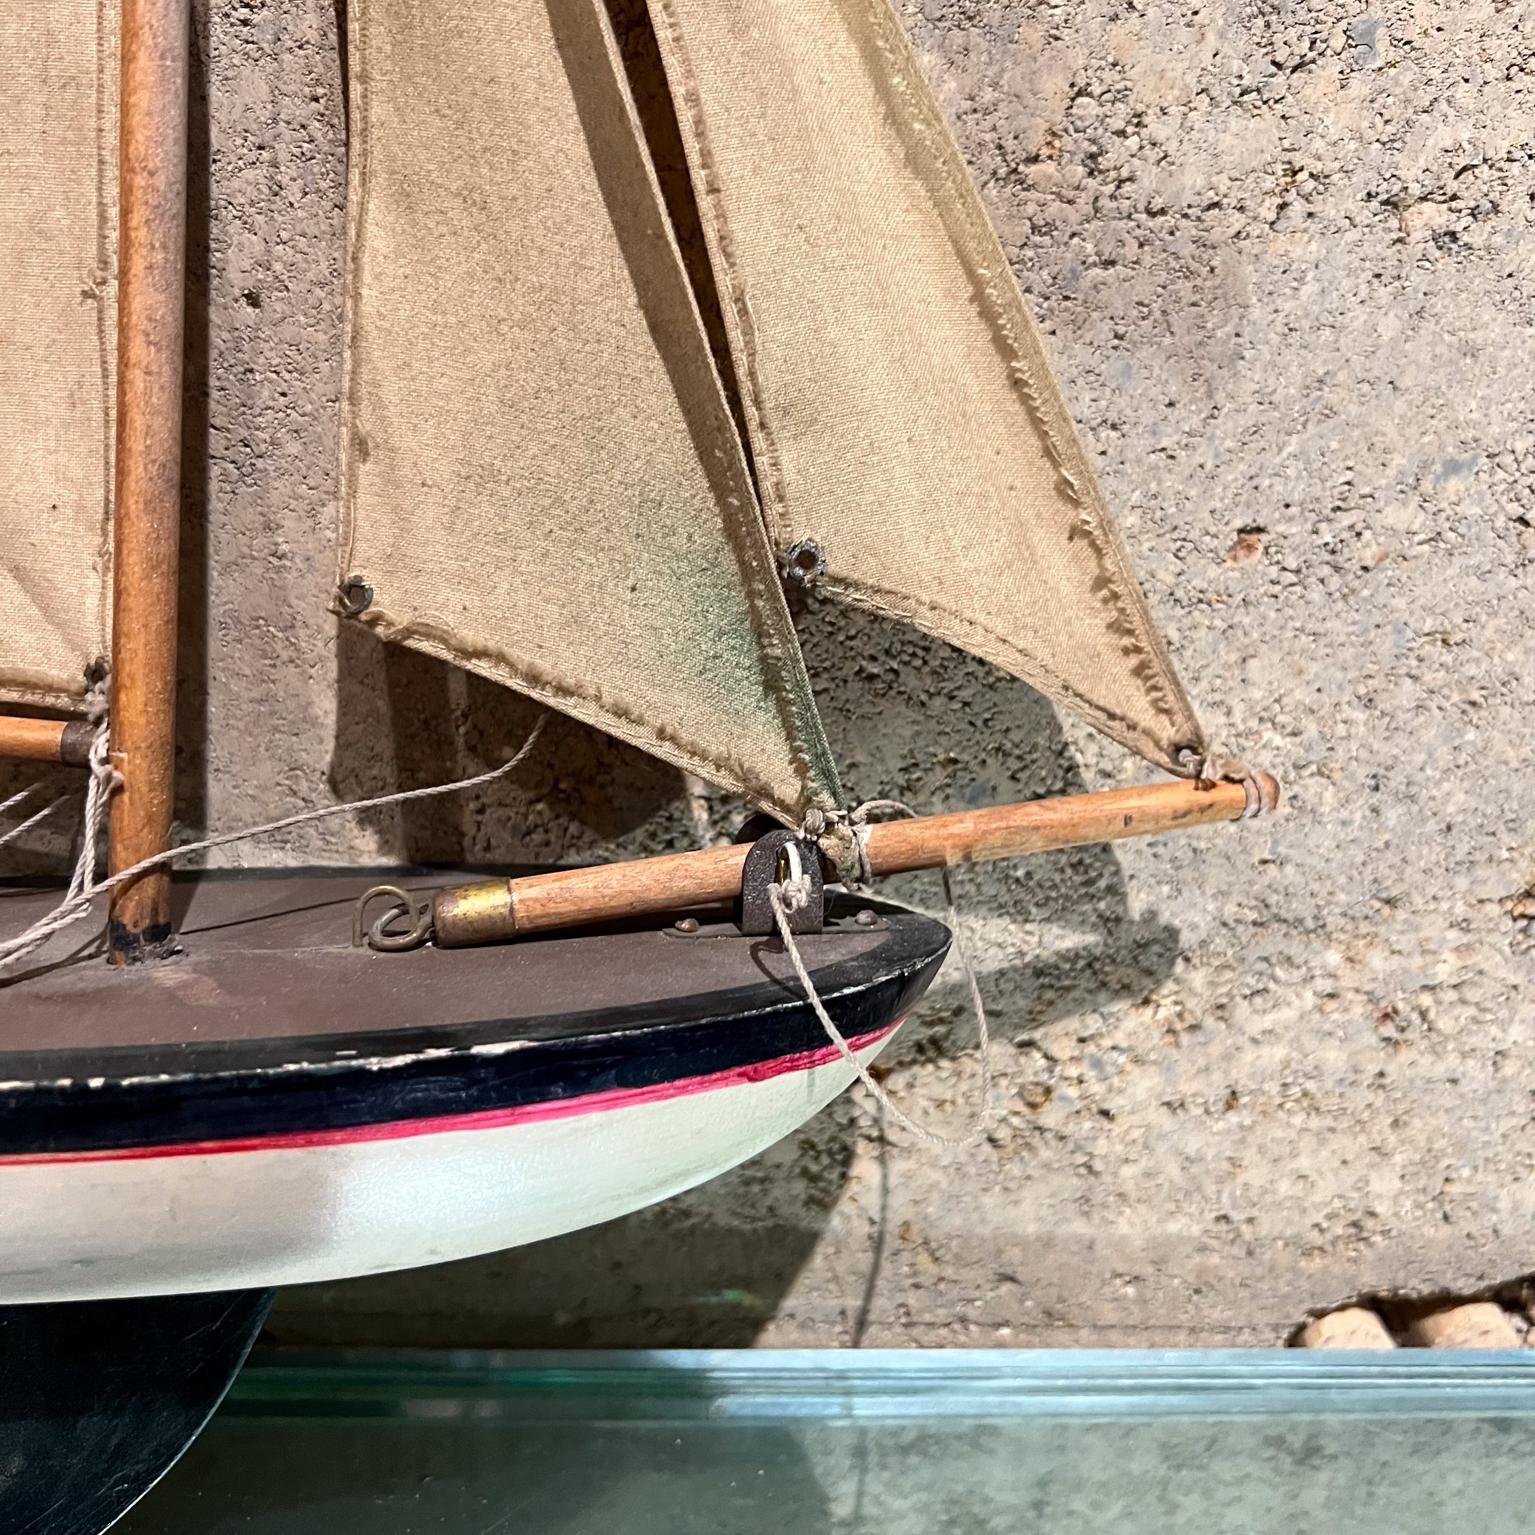 1950s Vintage Toy Old Pond Boat Wood Sailboat In Fair Condition For Sale In Chula Vista, CA